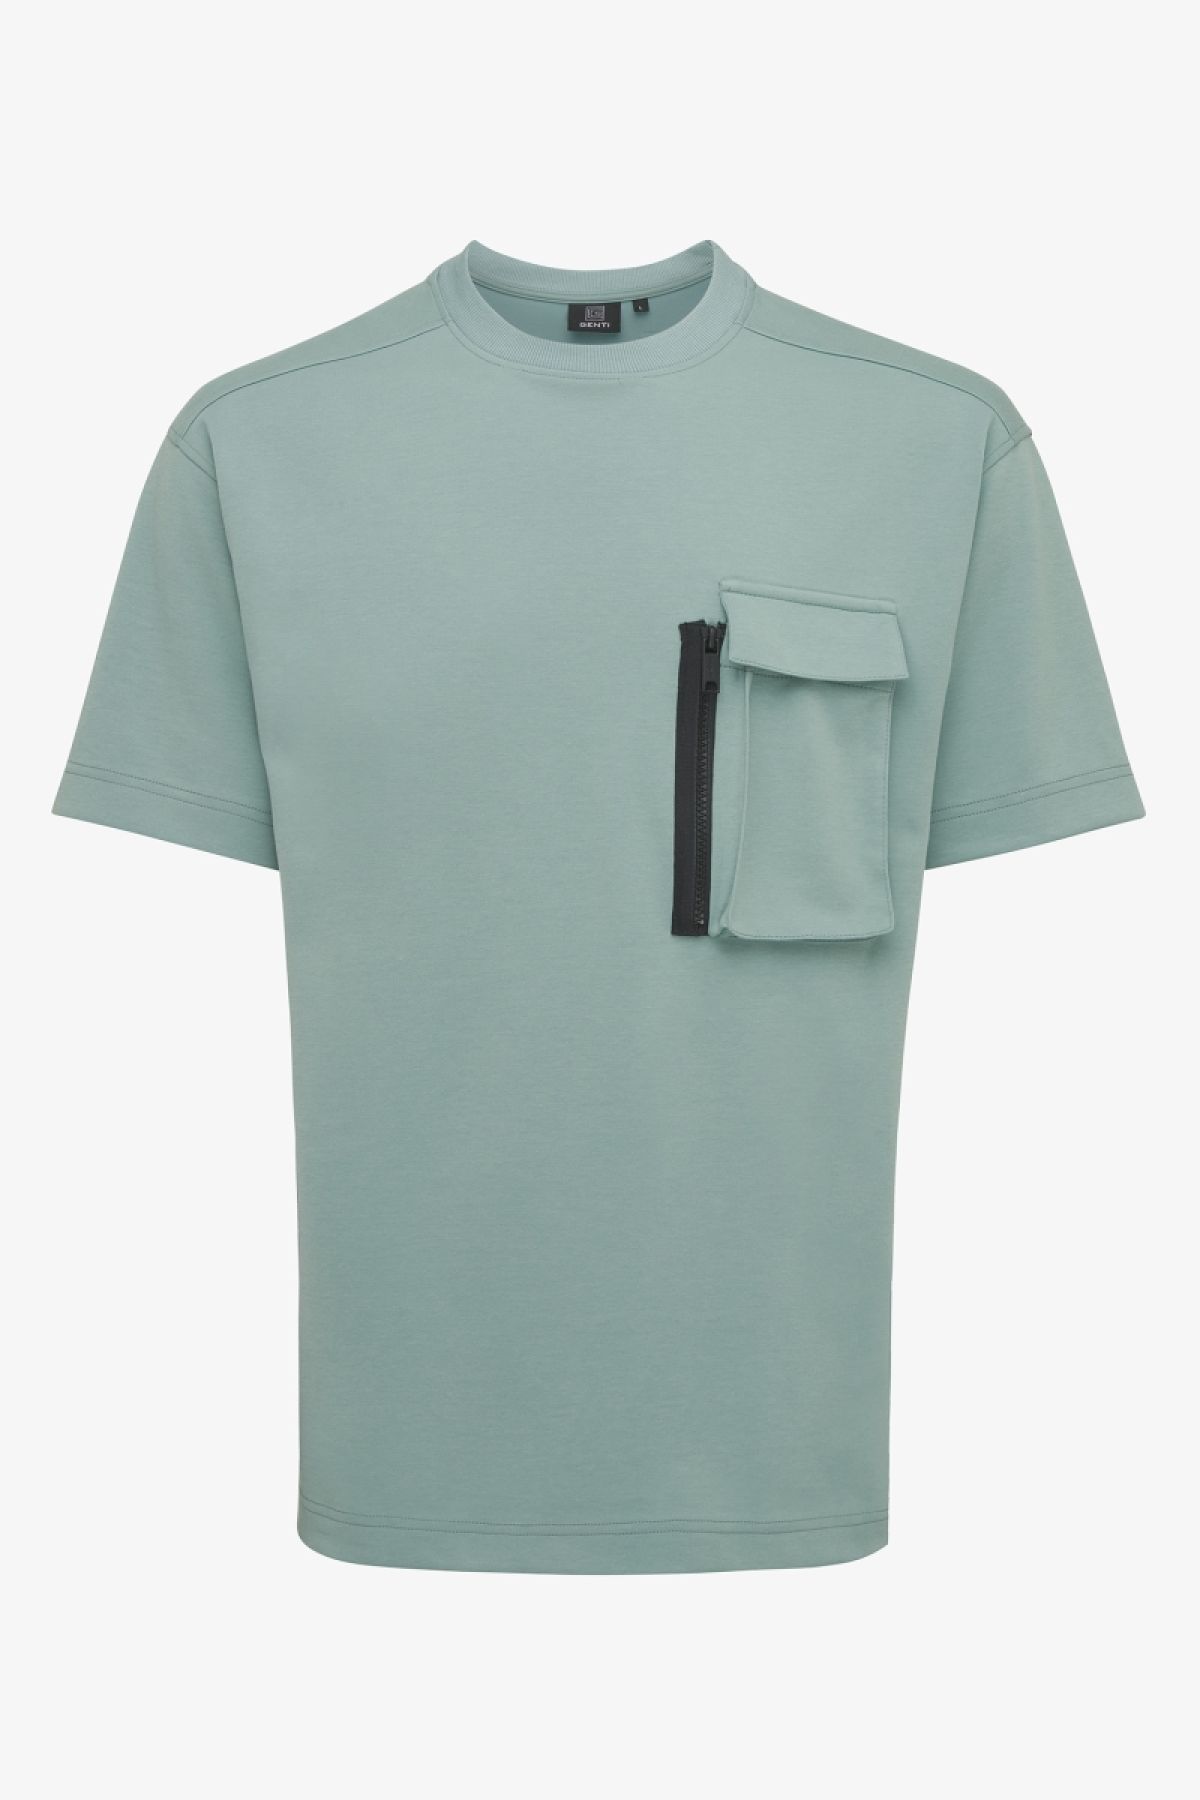 Relaxed fit tee pocket groen